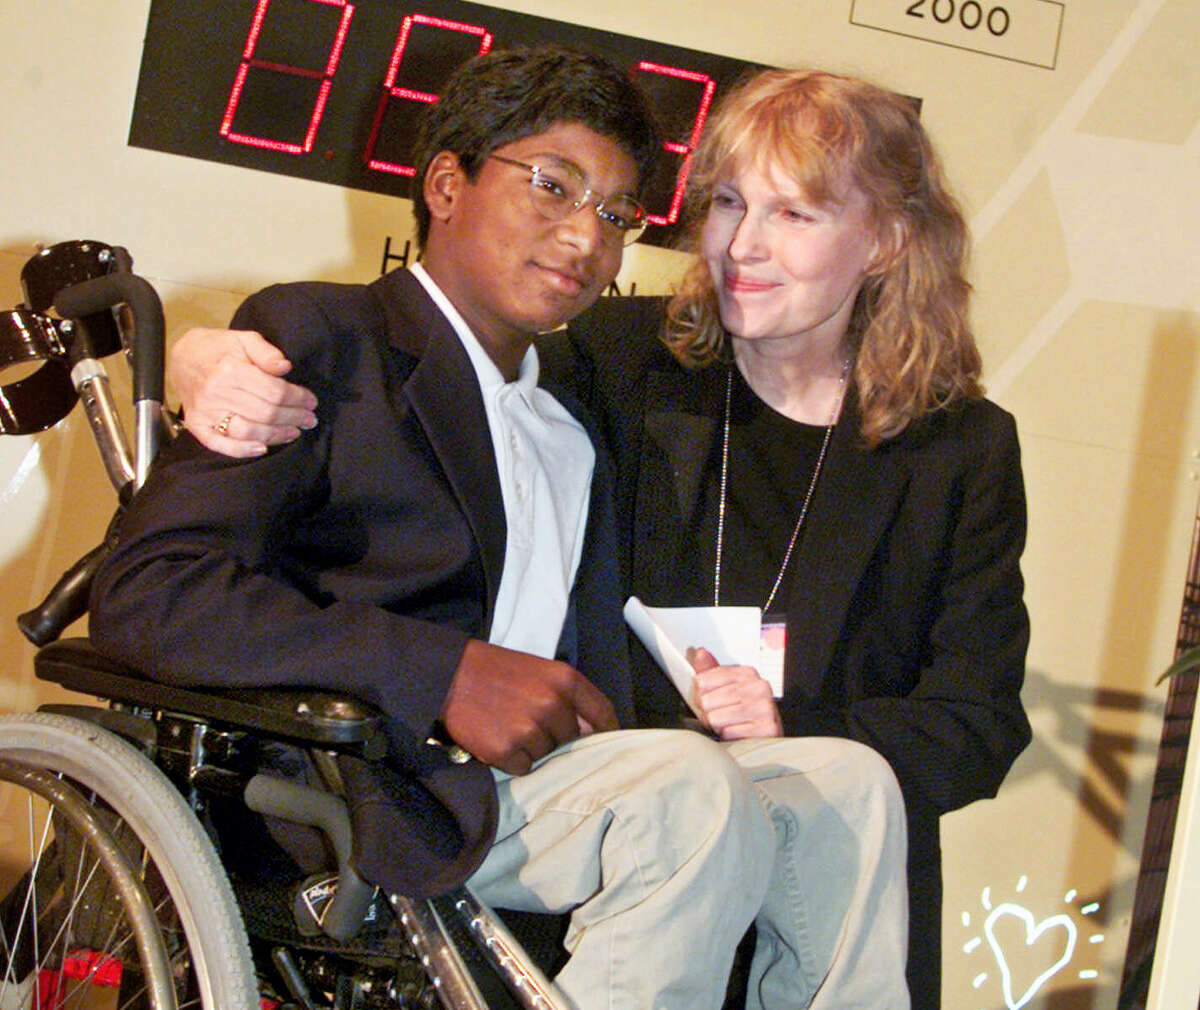 In this Sept. 27, 2000 file photo, actress Mia Farrow poses with her adopted son Thaddeus as they participate in the global summit on polio eradication at United Nations headquarters. Thaddeus Wilk Farrow, died, Wednesday, Sept 21, 2016, after being found seriously injured in his vehicle in Connecticut. The actress adopted Thaddeus, who contracted polio in an orphanage in Kolkata, India, and was paralyzed from the waist down. He was 27.